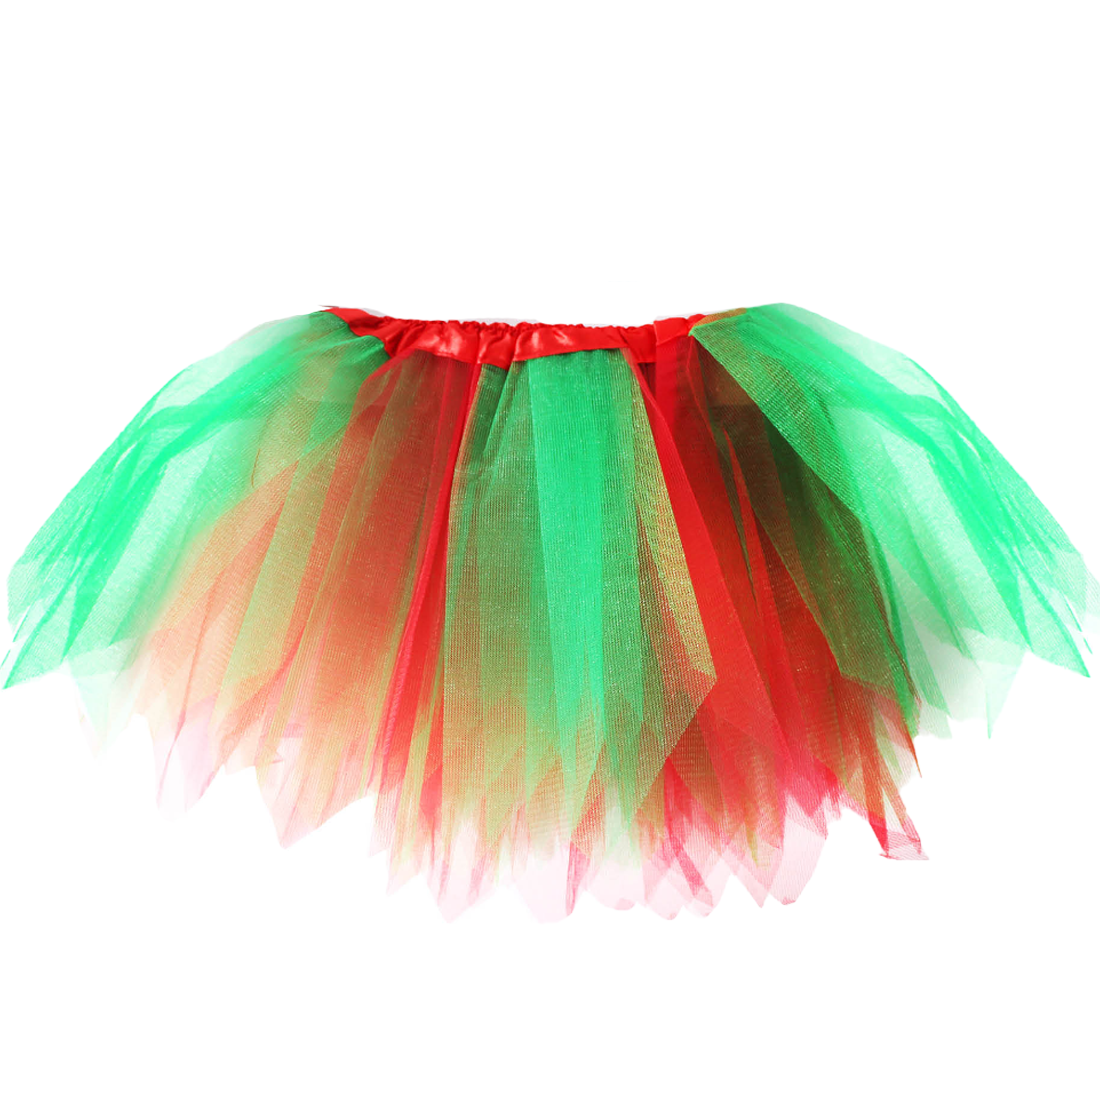 30cm Christmas Red and Green Tutu